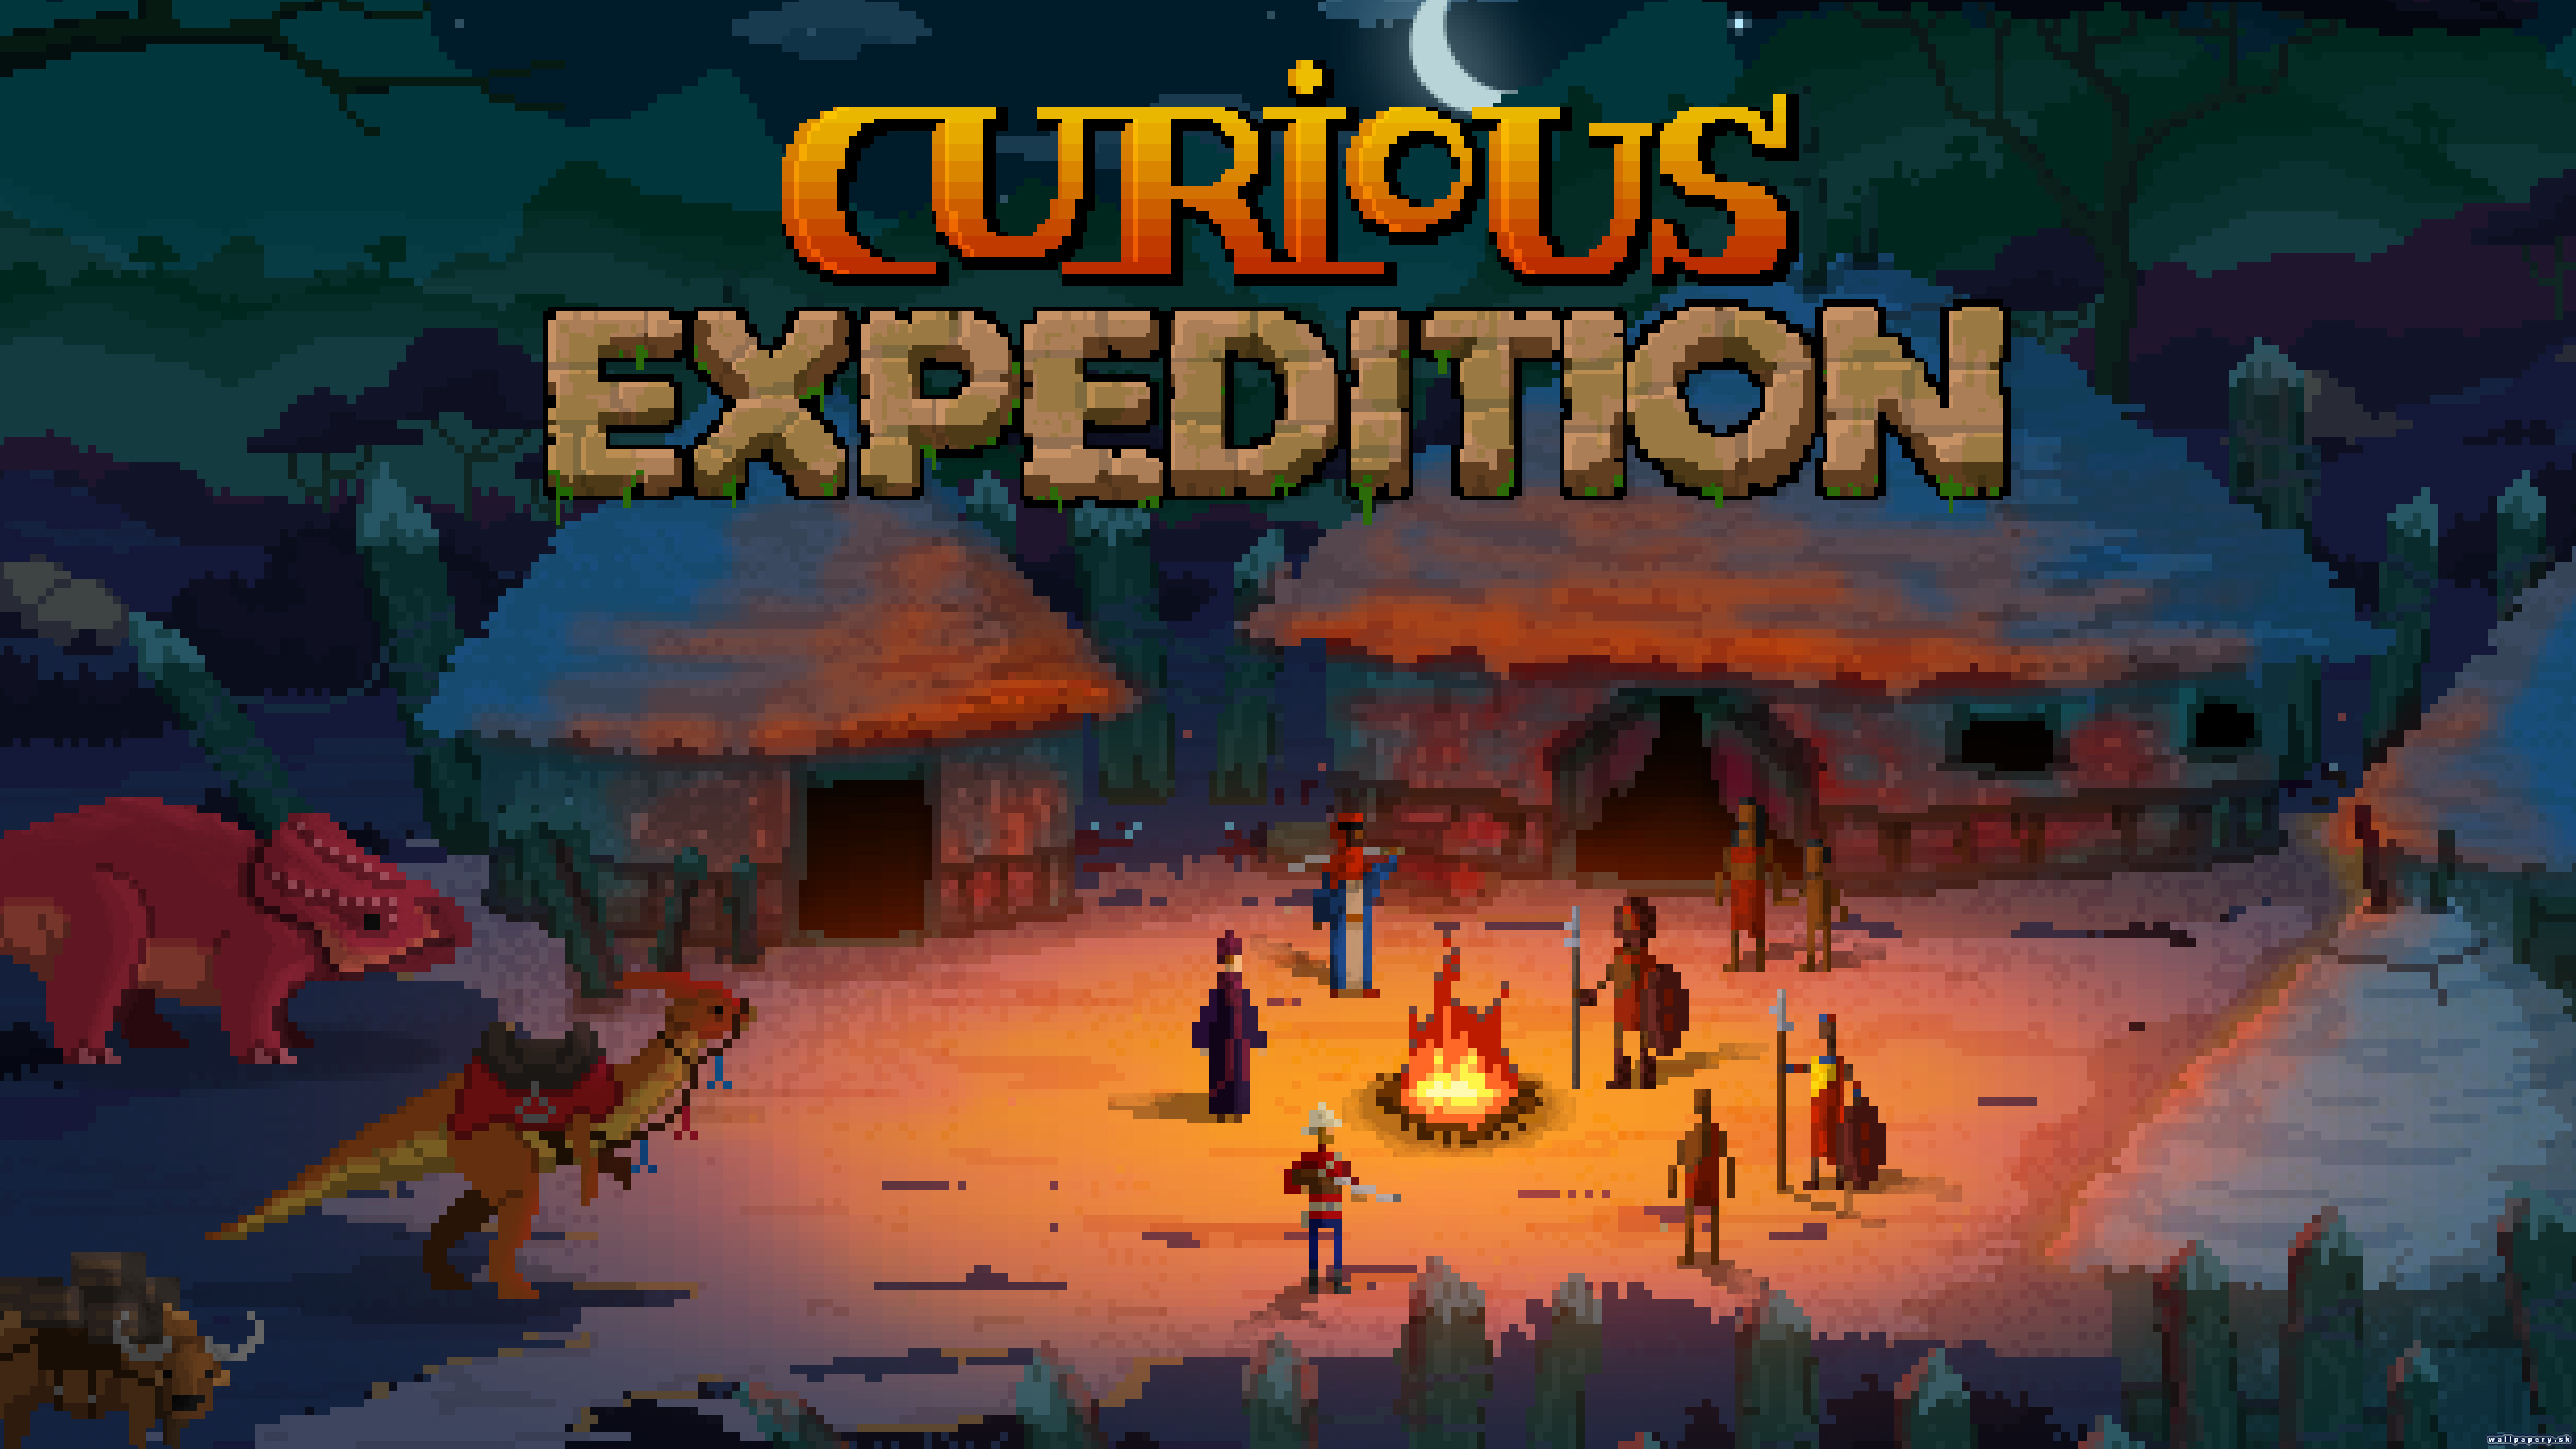 Curious Expedition - wallpaper 2